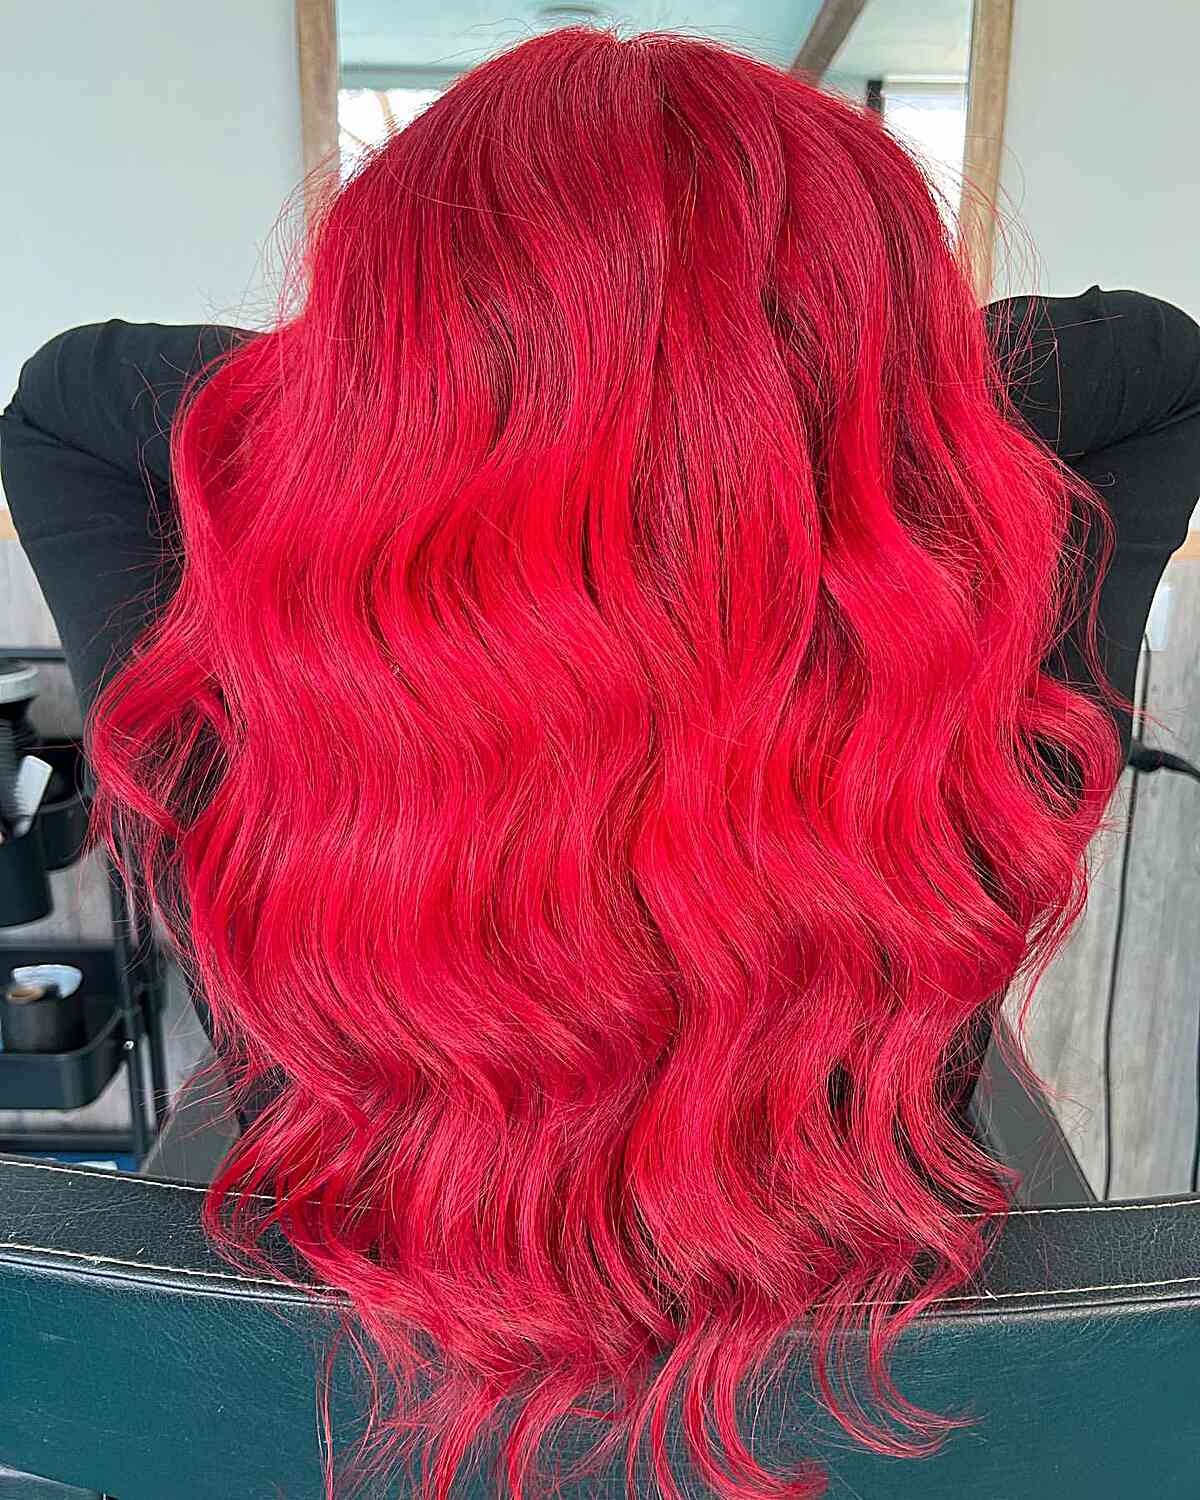 Bright Red Hair Dye for women with long wavy hair